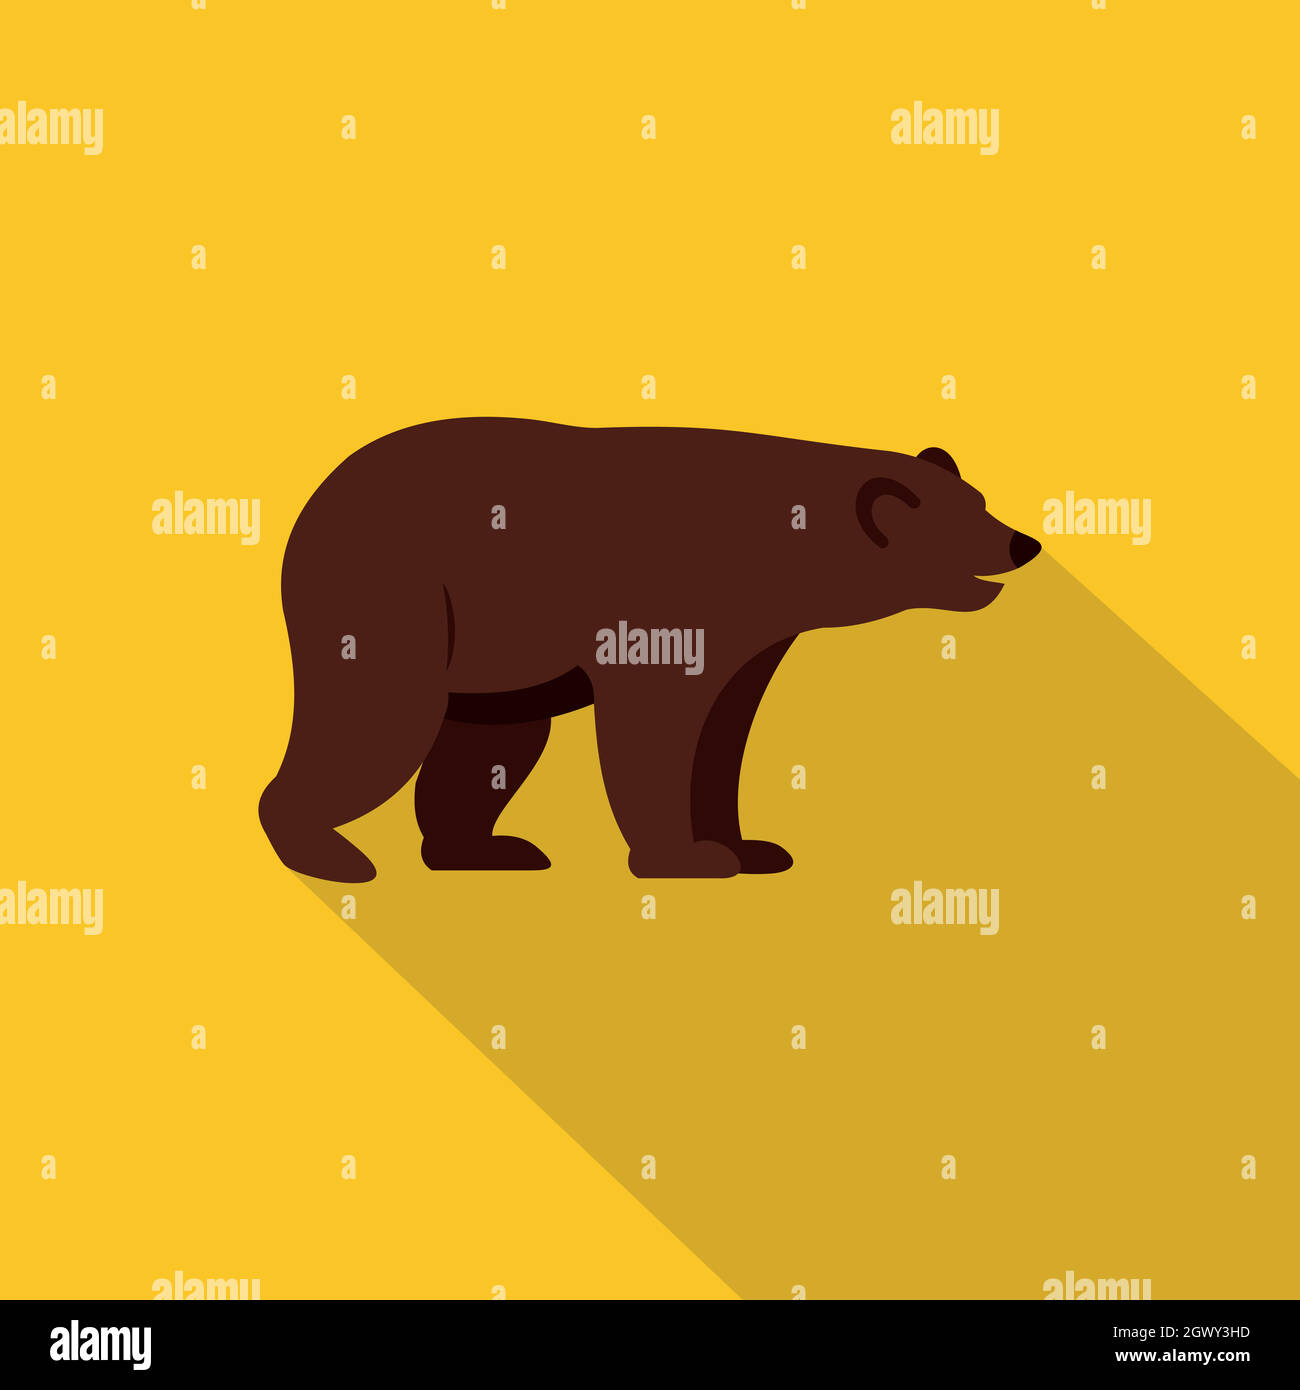 Grizzly bear icon, flat style Stock Vector